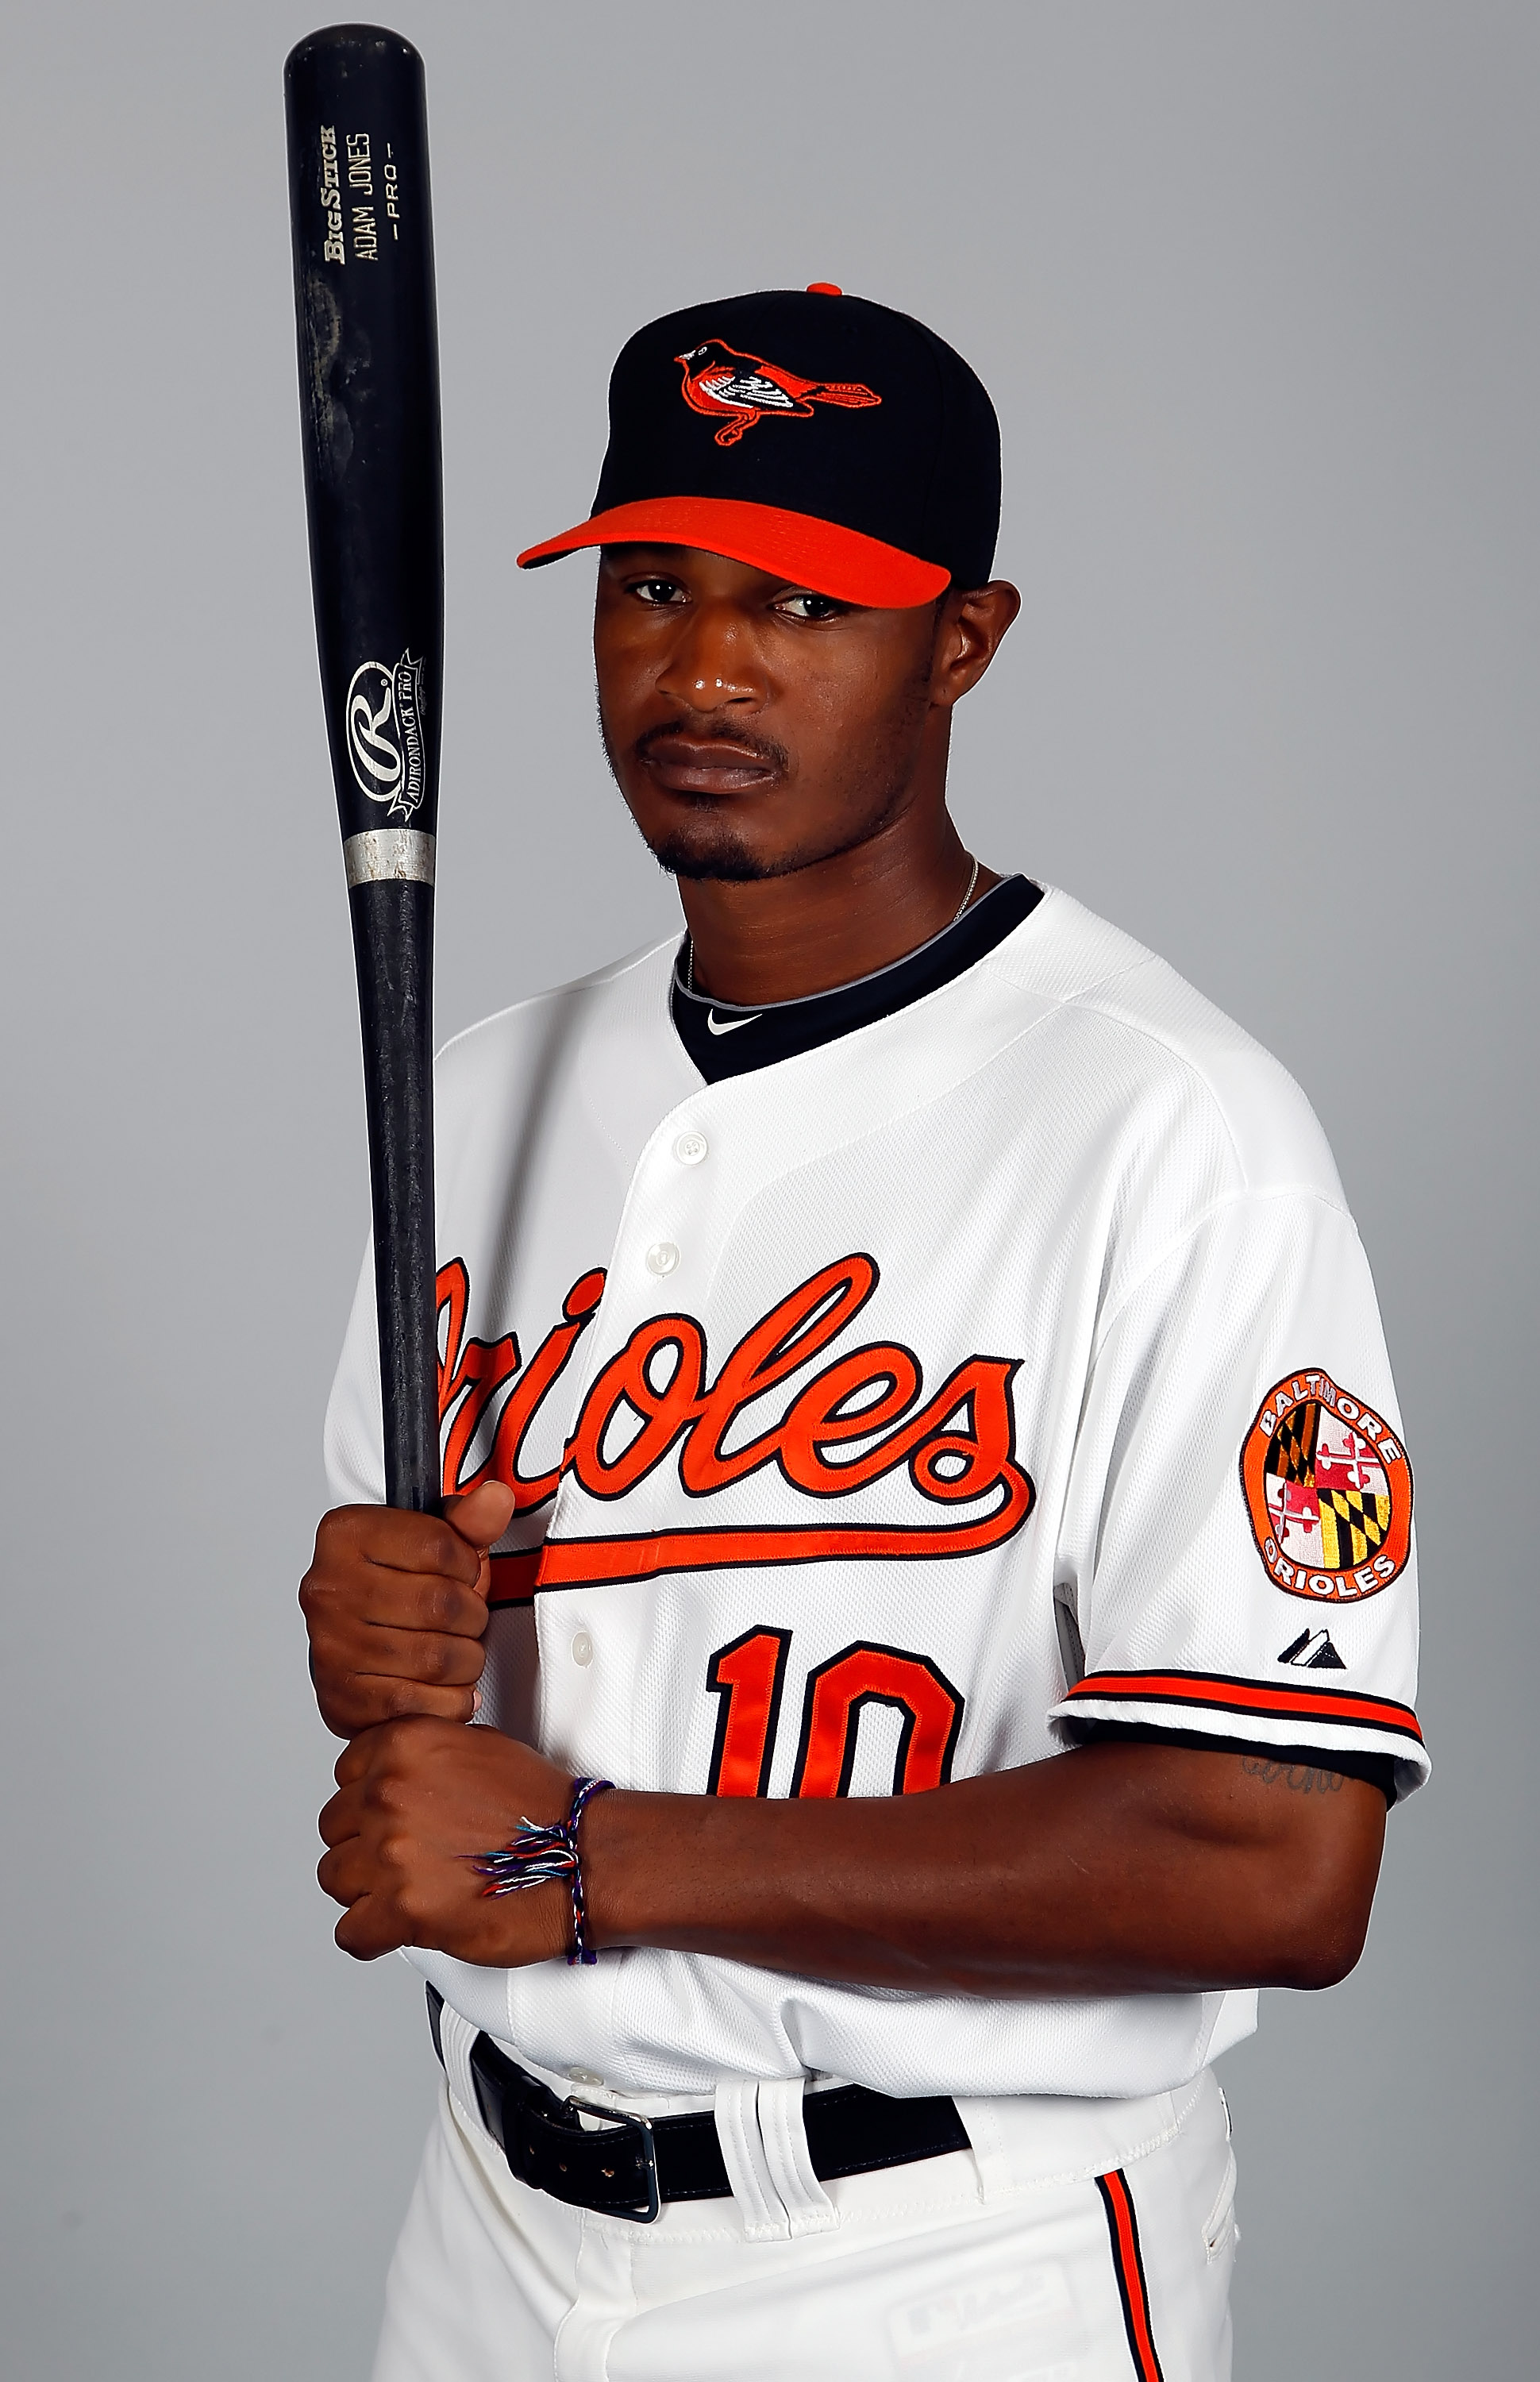 SARASOTA, FL - FEBRUARY 26:  Outfielder Adam Jones #10 of the Baltimore Orioles poses for a photo during photo day at Ed Smith Stadium on February 26, 2011 in Sarasota, Florida.  (Photo by J. Meric/Getty Images)